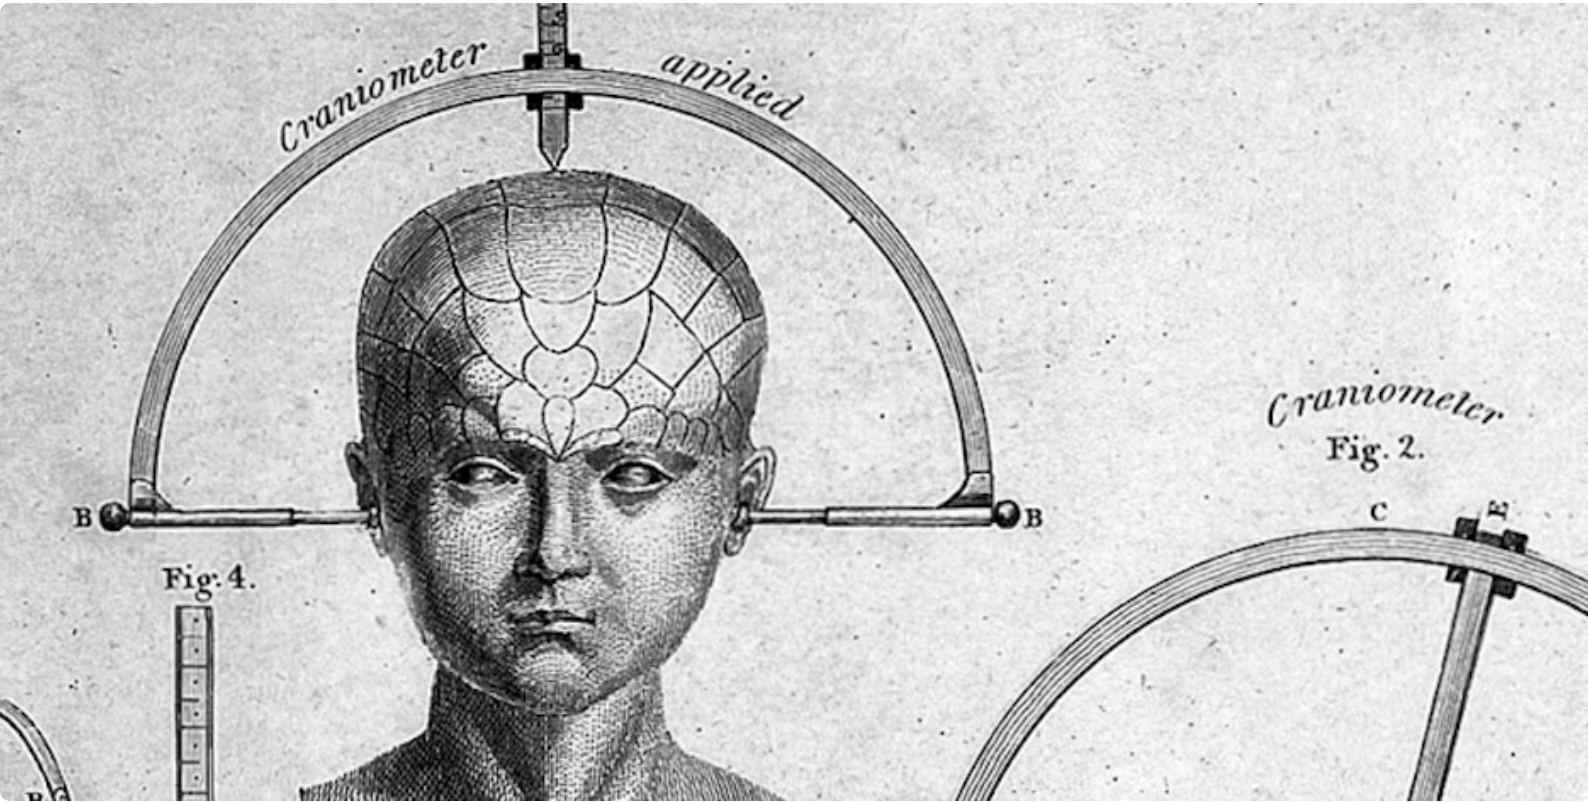 Fragment of what looks like a 19th-century black and white medical illustration. It shows an androgynous human face from the neck up. The skill seems slightly oversized in the top half, as if holding a very large brain. An instrument encircles the top of the head and appears to be measuring the distance from ear to ear, with the label 'Craniometer applied'